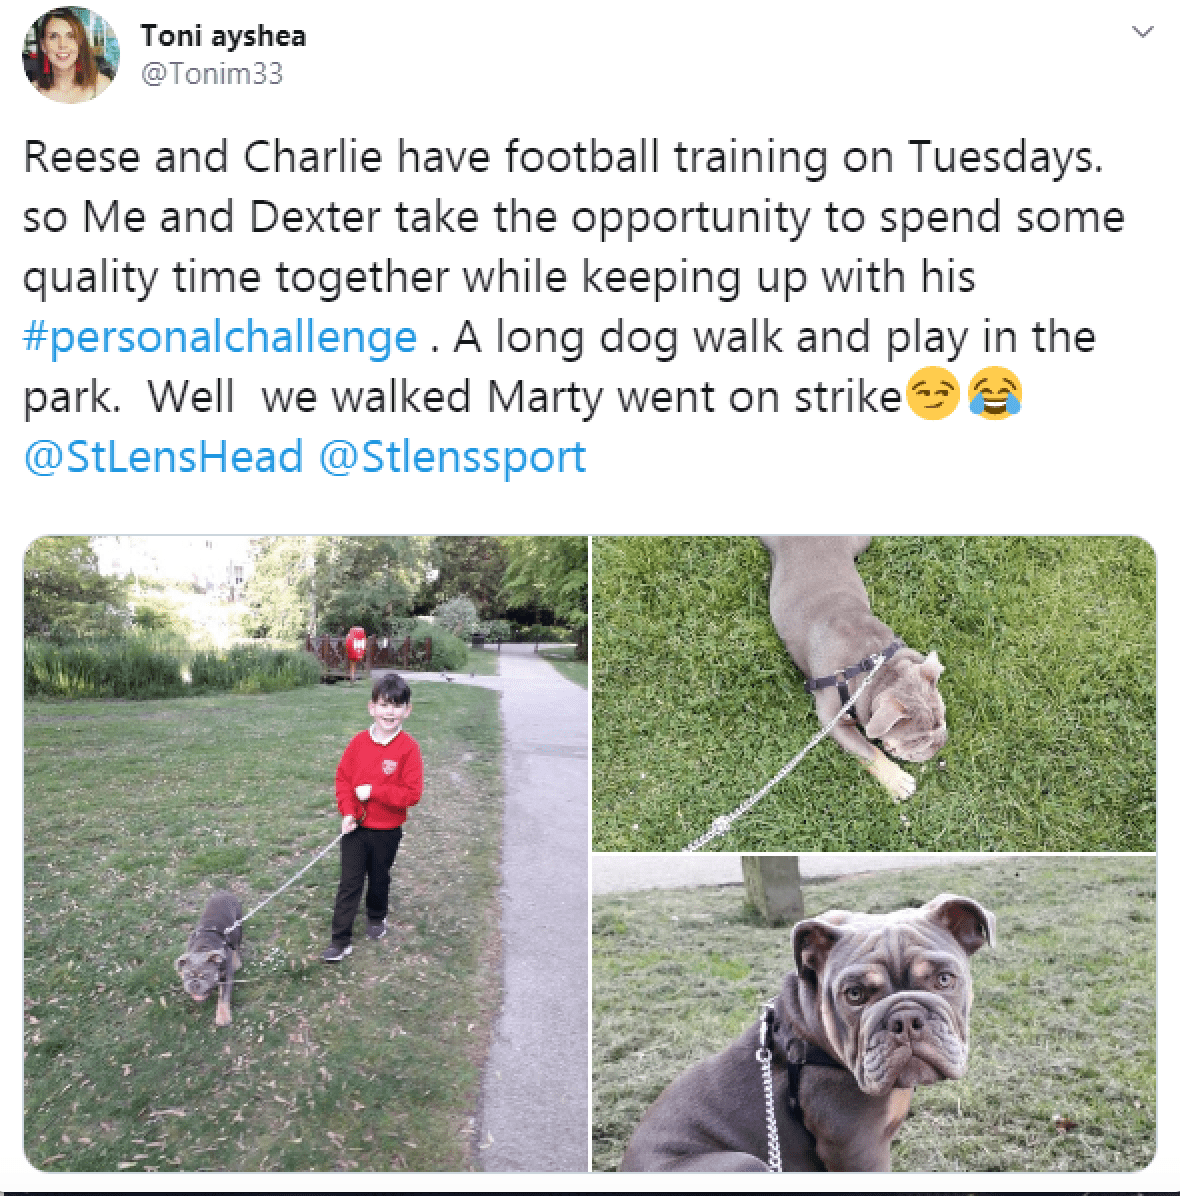 tweet from a family involved in the challenge showing them on a dog walk